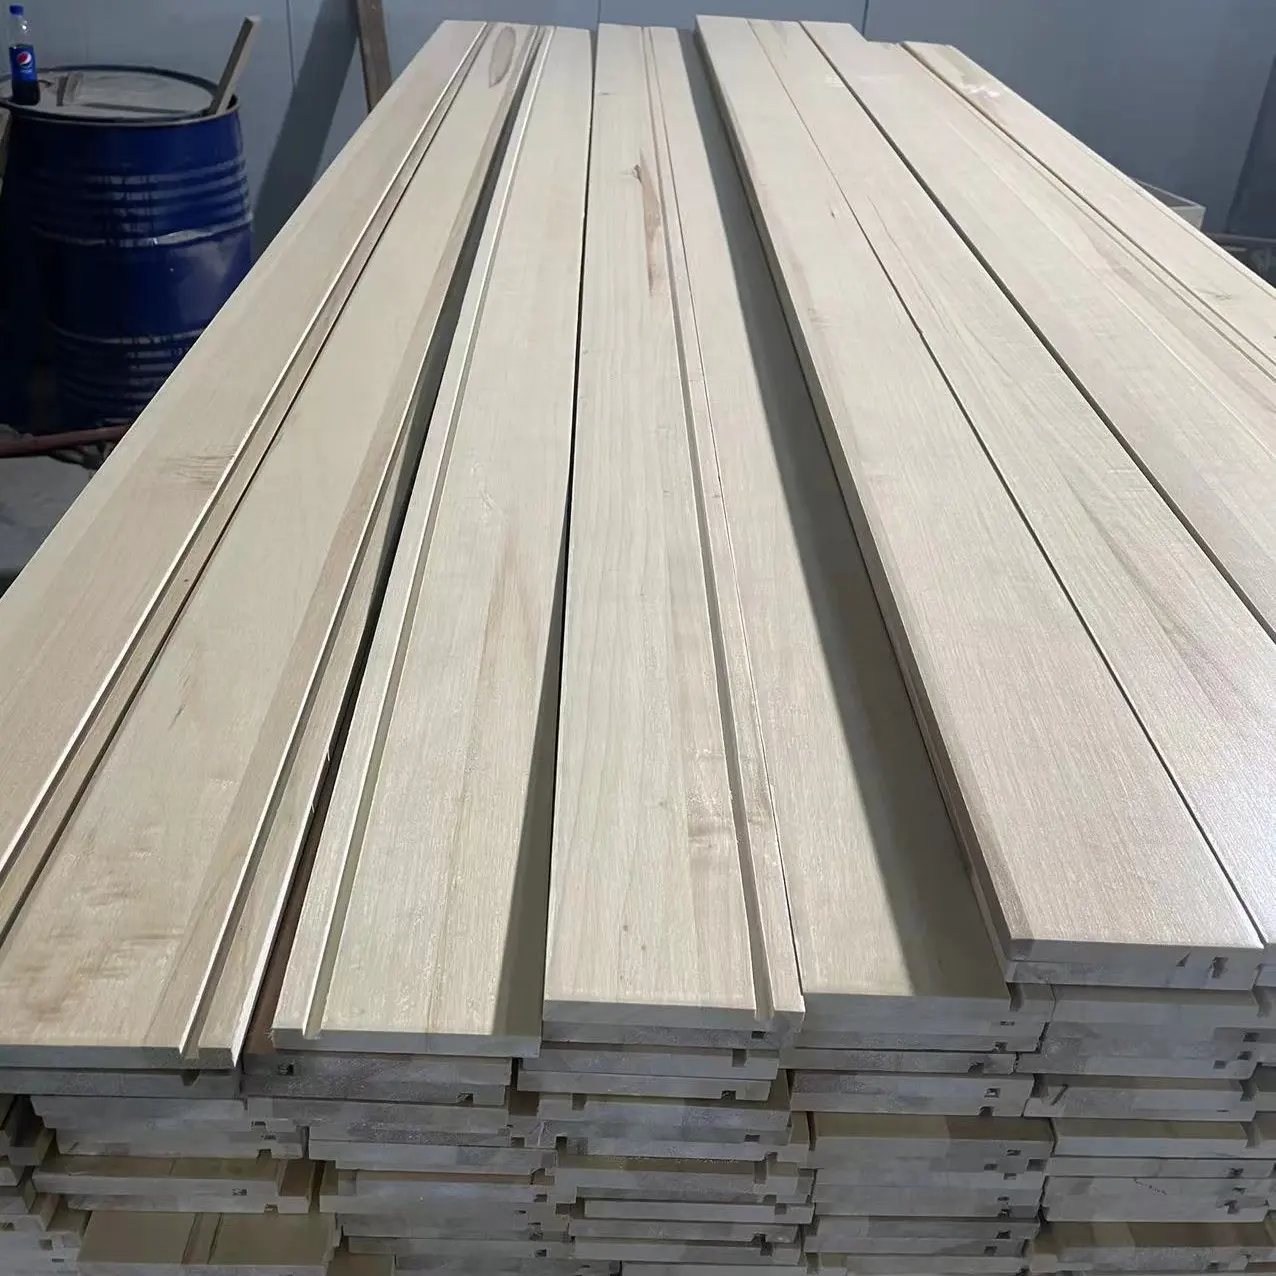 Factory supplies wood furniture for purposes construction wooden frame paulownia board